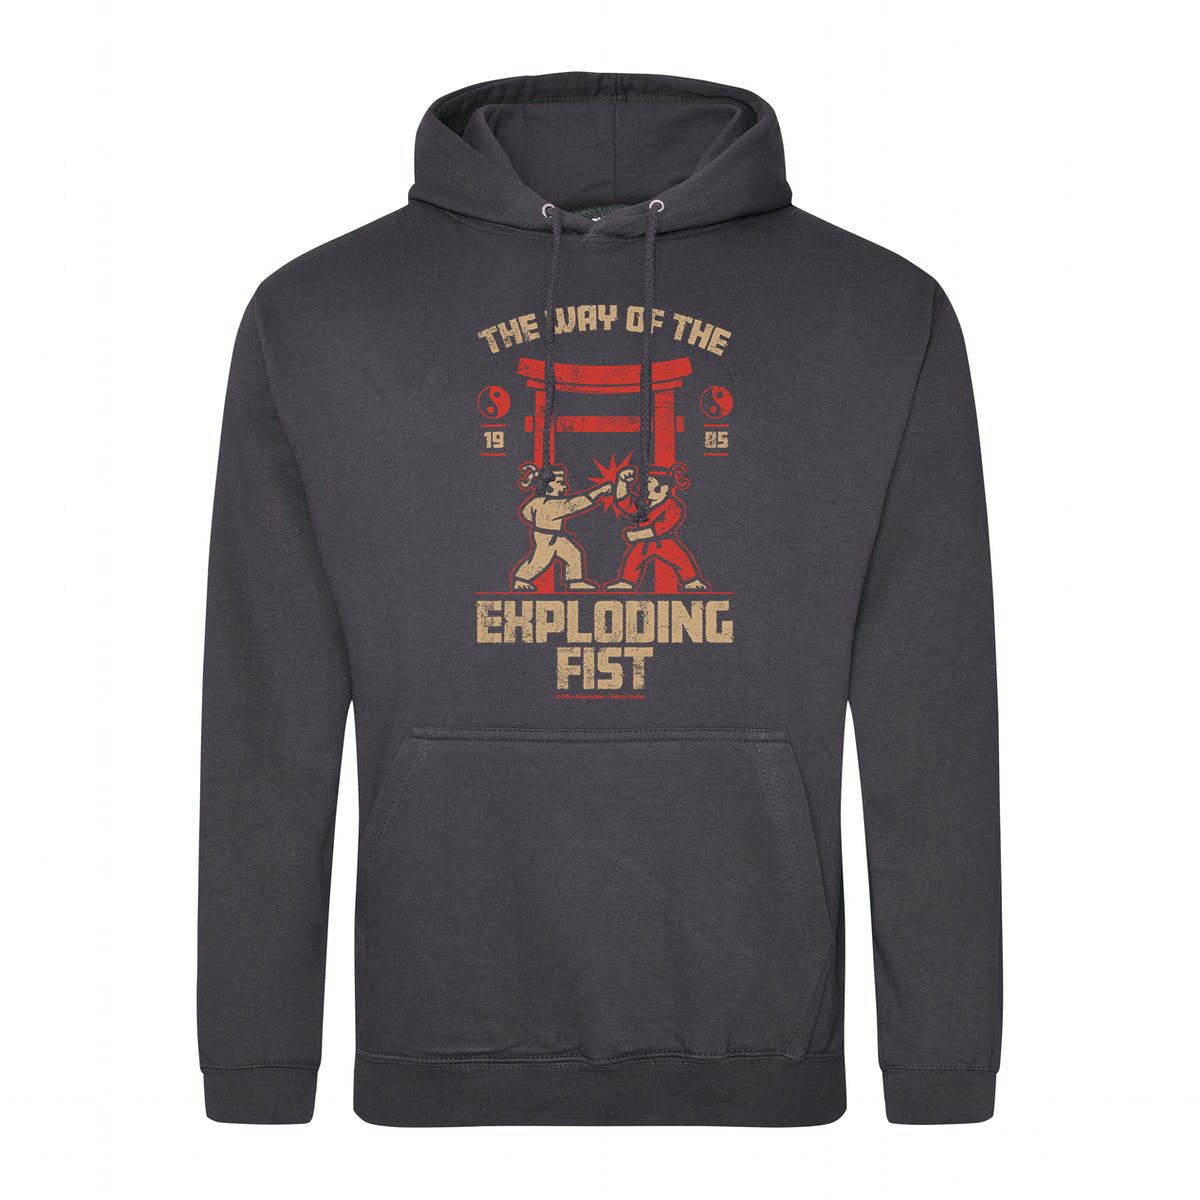 The Way Of The Exploding Fist Retro Gaming Hoodie Hoodie Seven Squared Small 36" Chest Storm Grey 